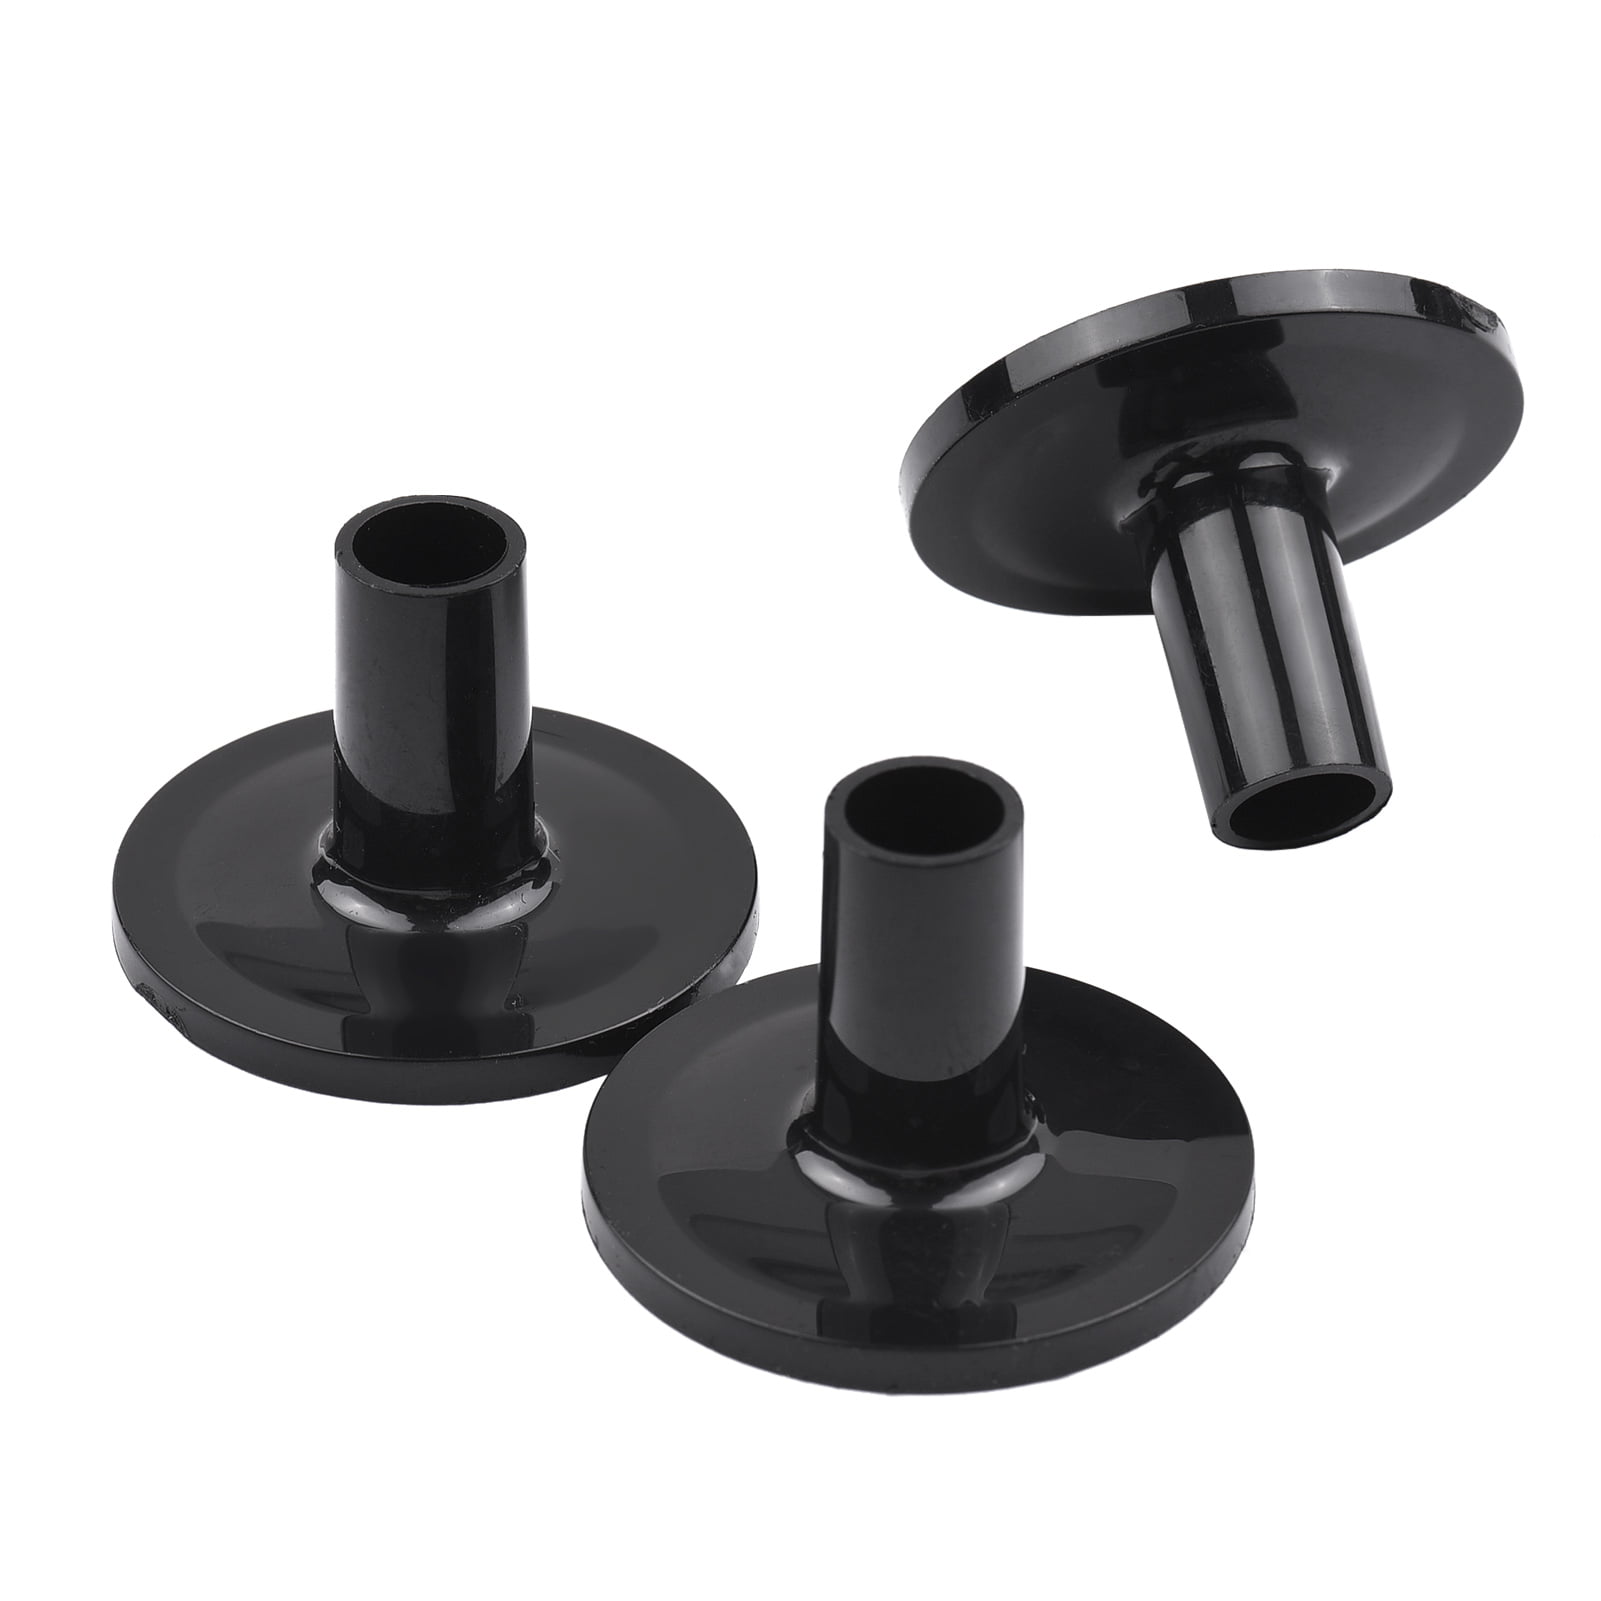 Black Drum Cymbal Sleeves Plastic Drum Set Cymbal Stands Replacement with Flange Base 10 Pack 